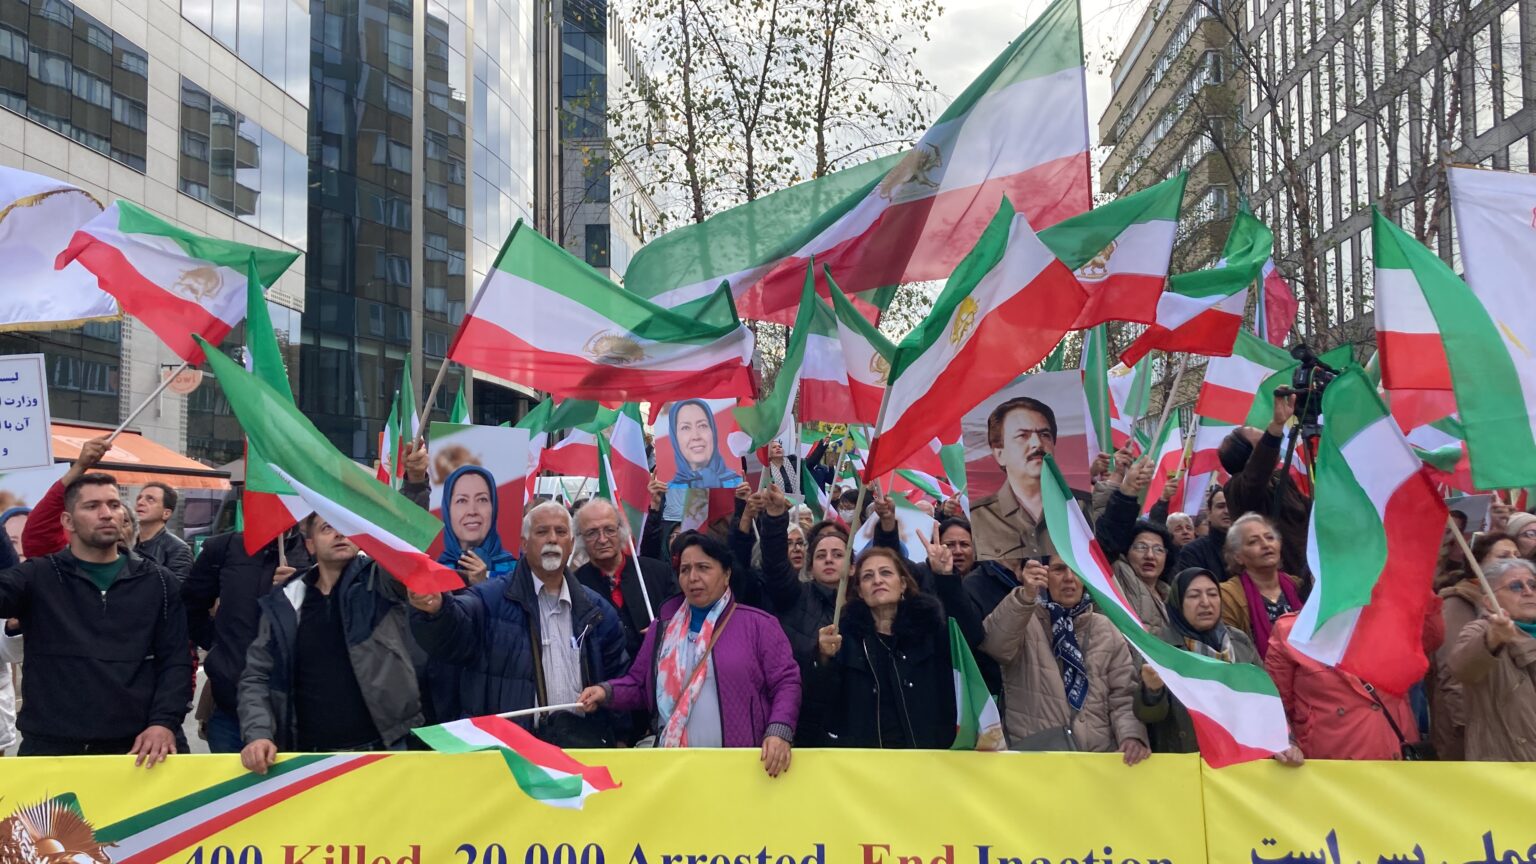 The Large Demonstration of Iranians simultaneous with the EU leaders summit in Brussels, Supporting the Nationwide Iran Protests in Iran